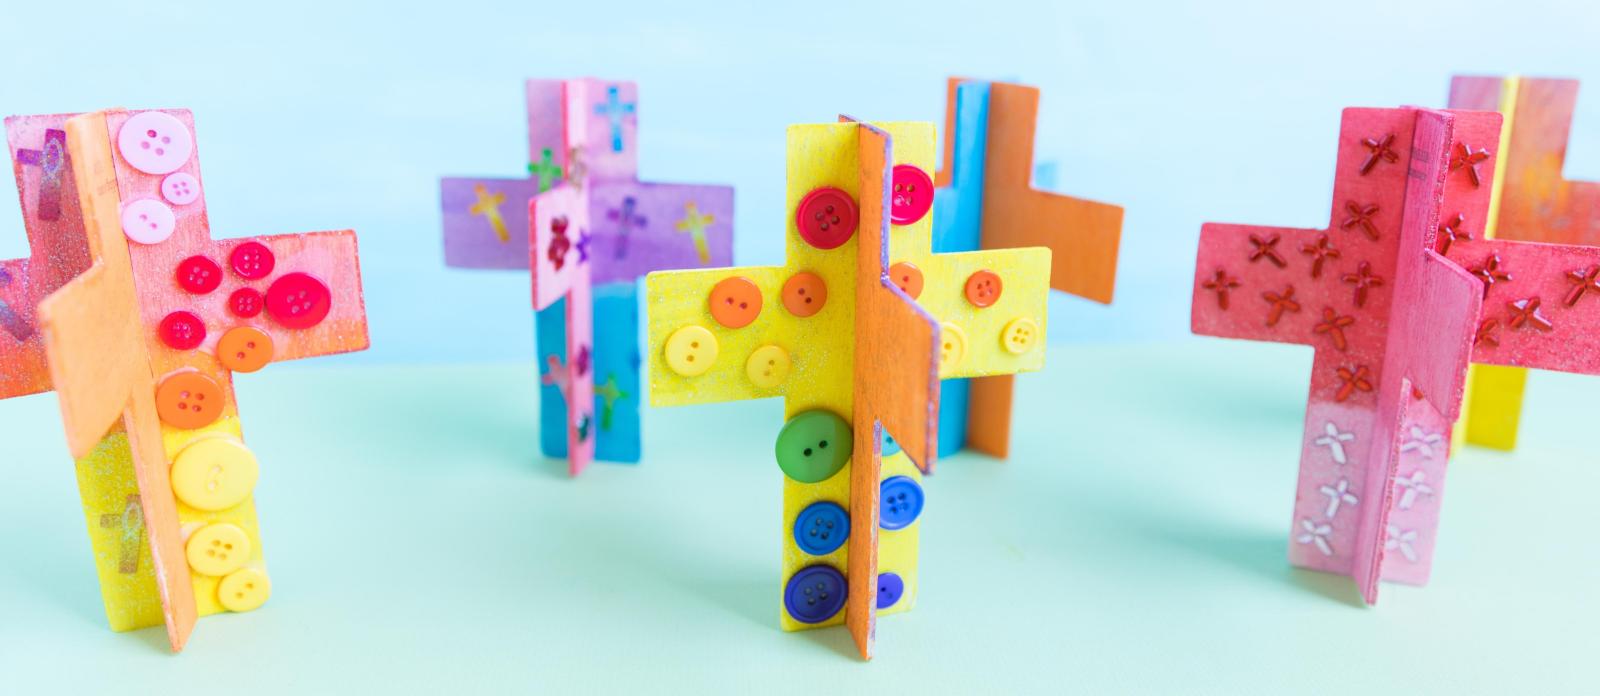 Sunday School Crafts - 3 Simple Ideas That Won't Break The Bank -  Christianity Cove